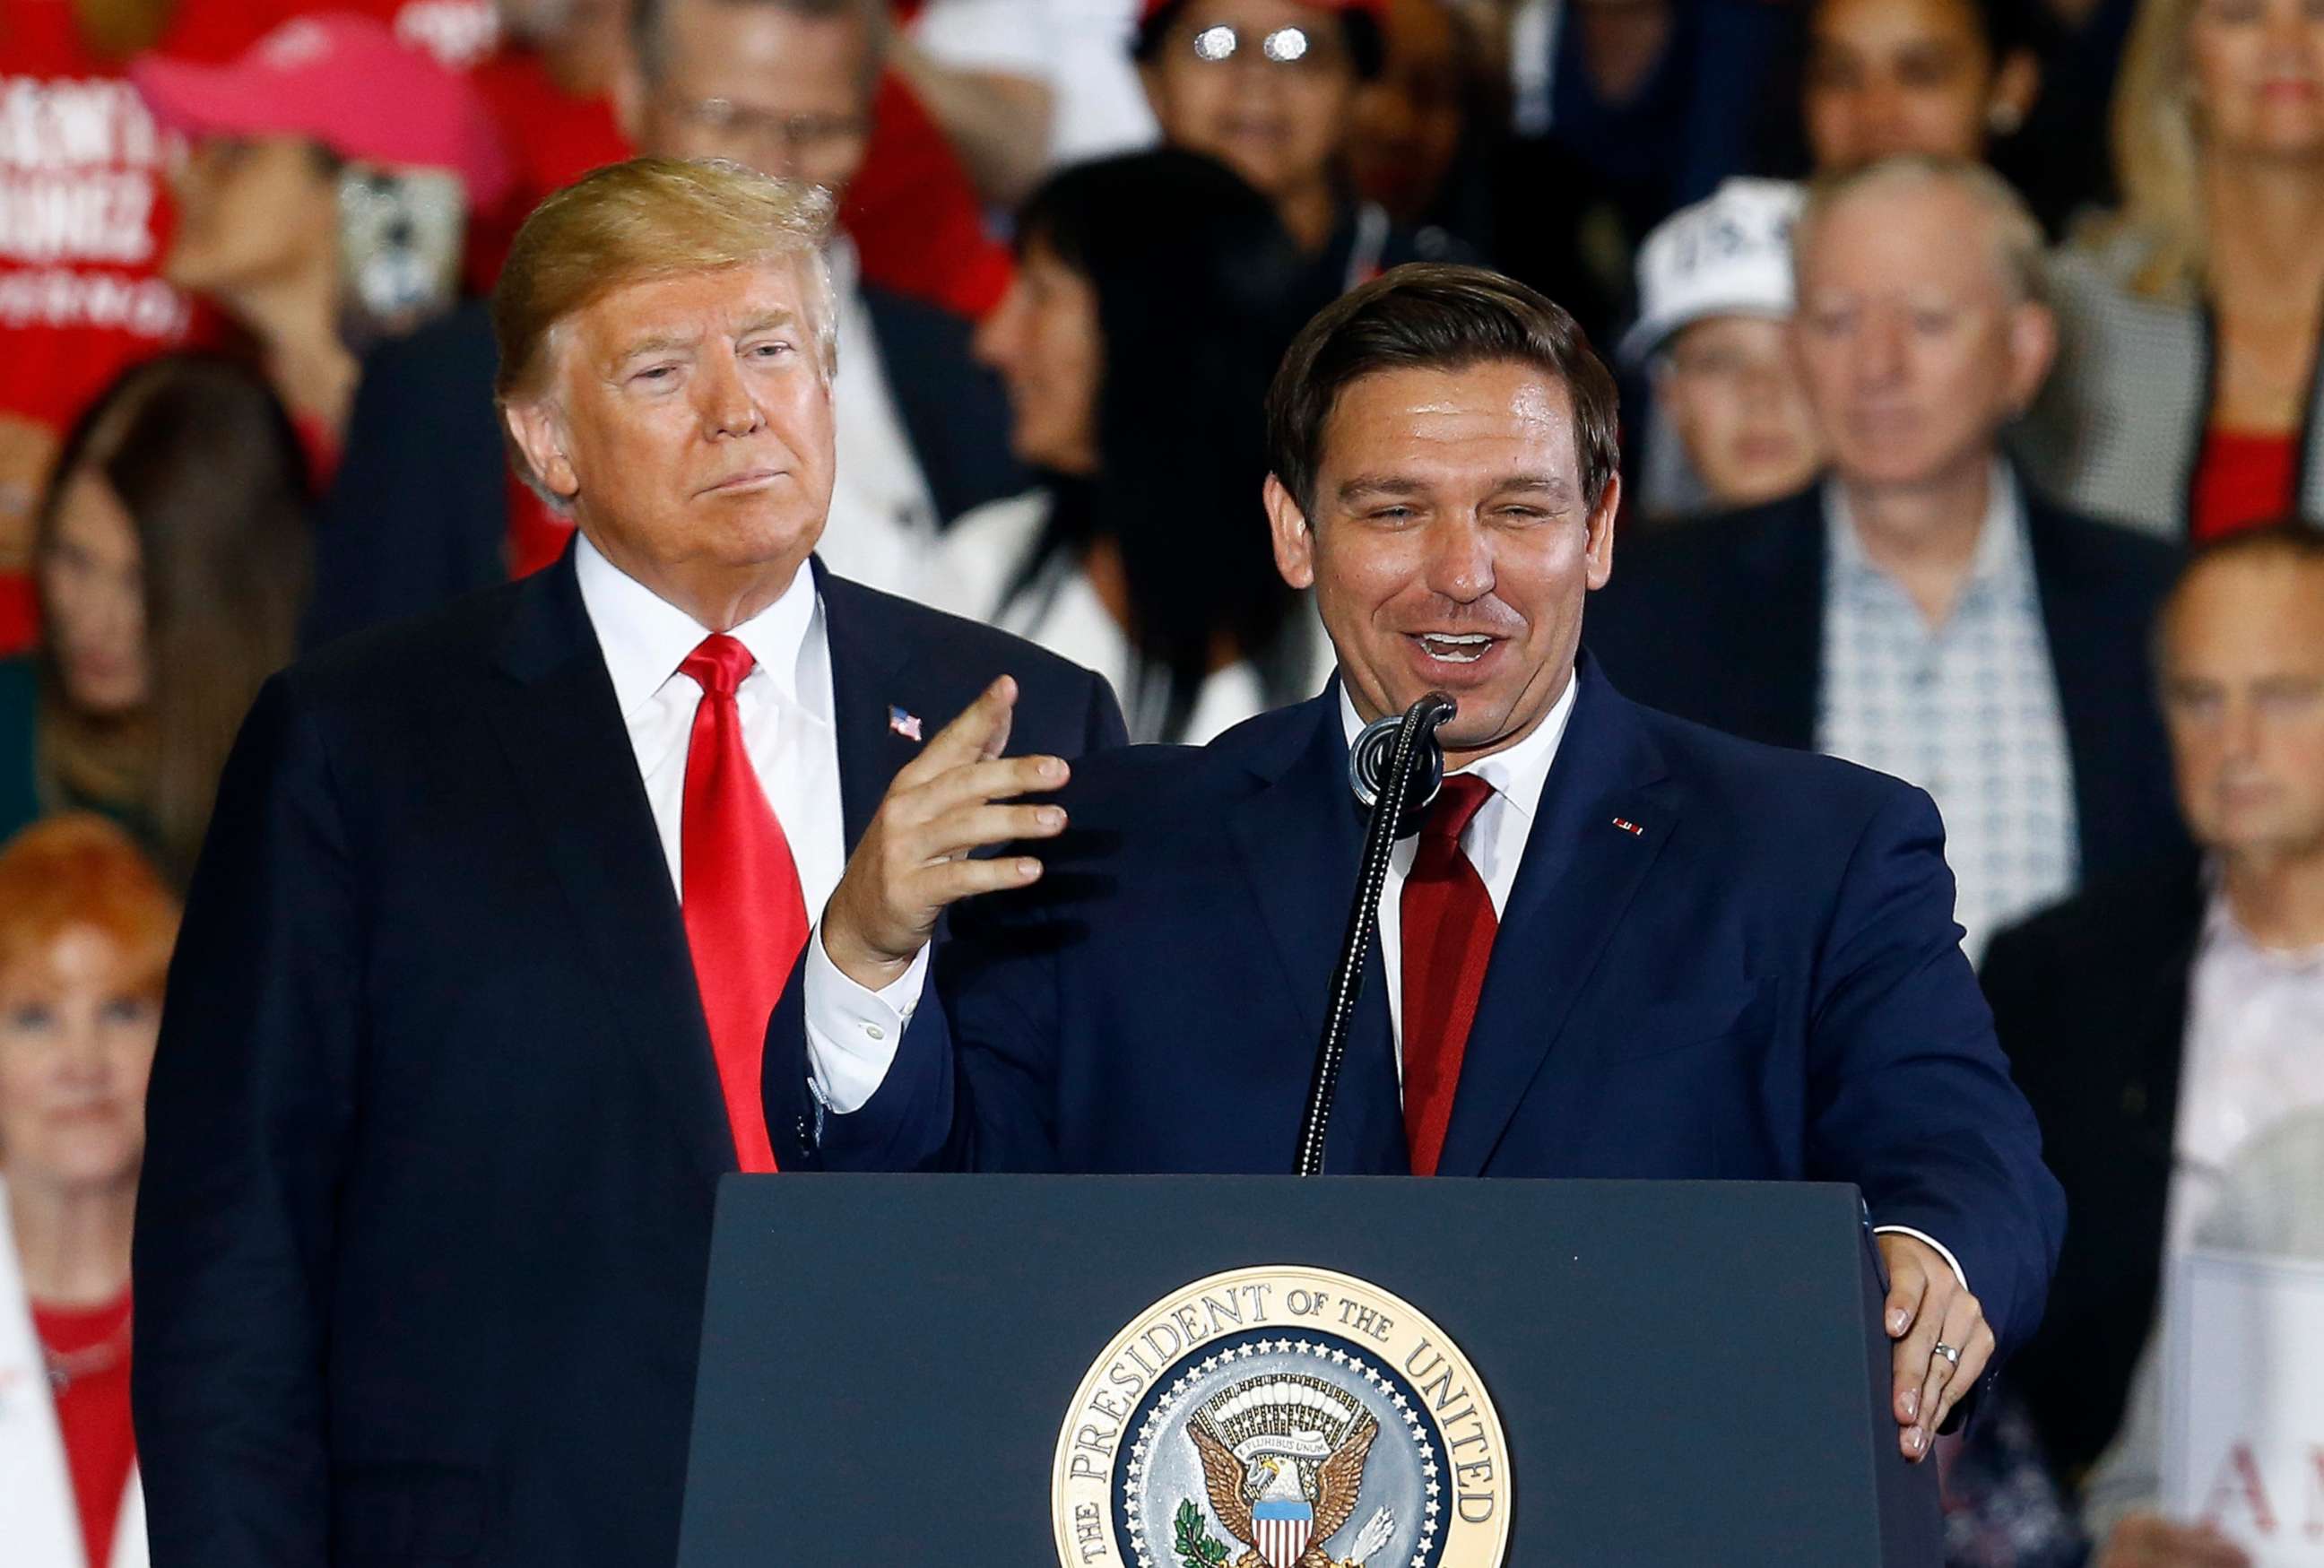 PHOTO: Gubernatorial candidate Ron DeSantis speaks at a rally with President Donald Trump, Nov. 3, 2018, in Pensacola, Fla.